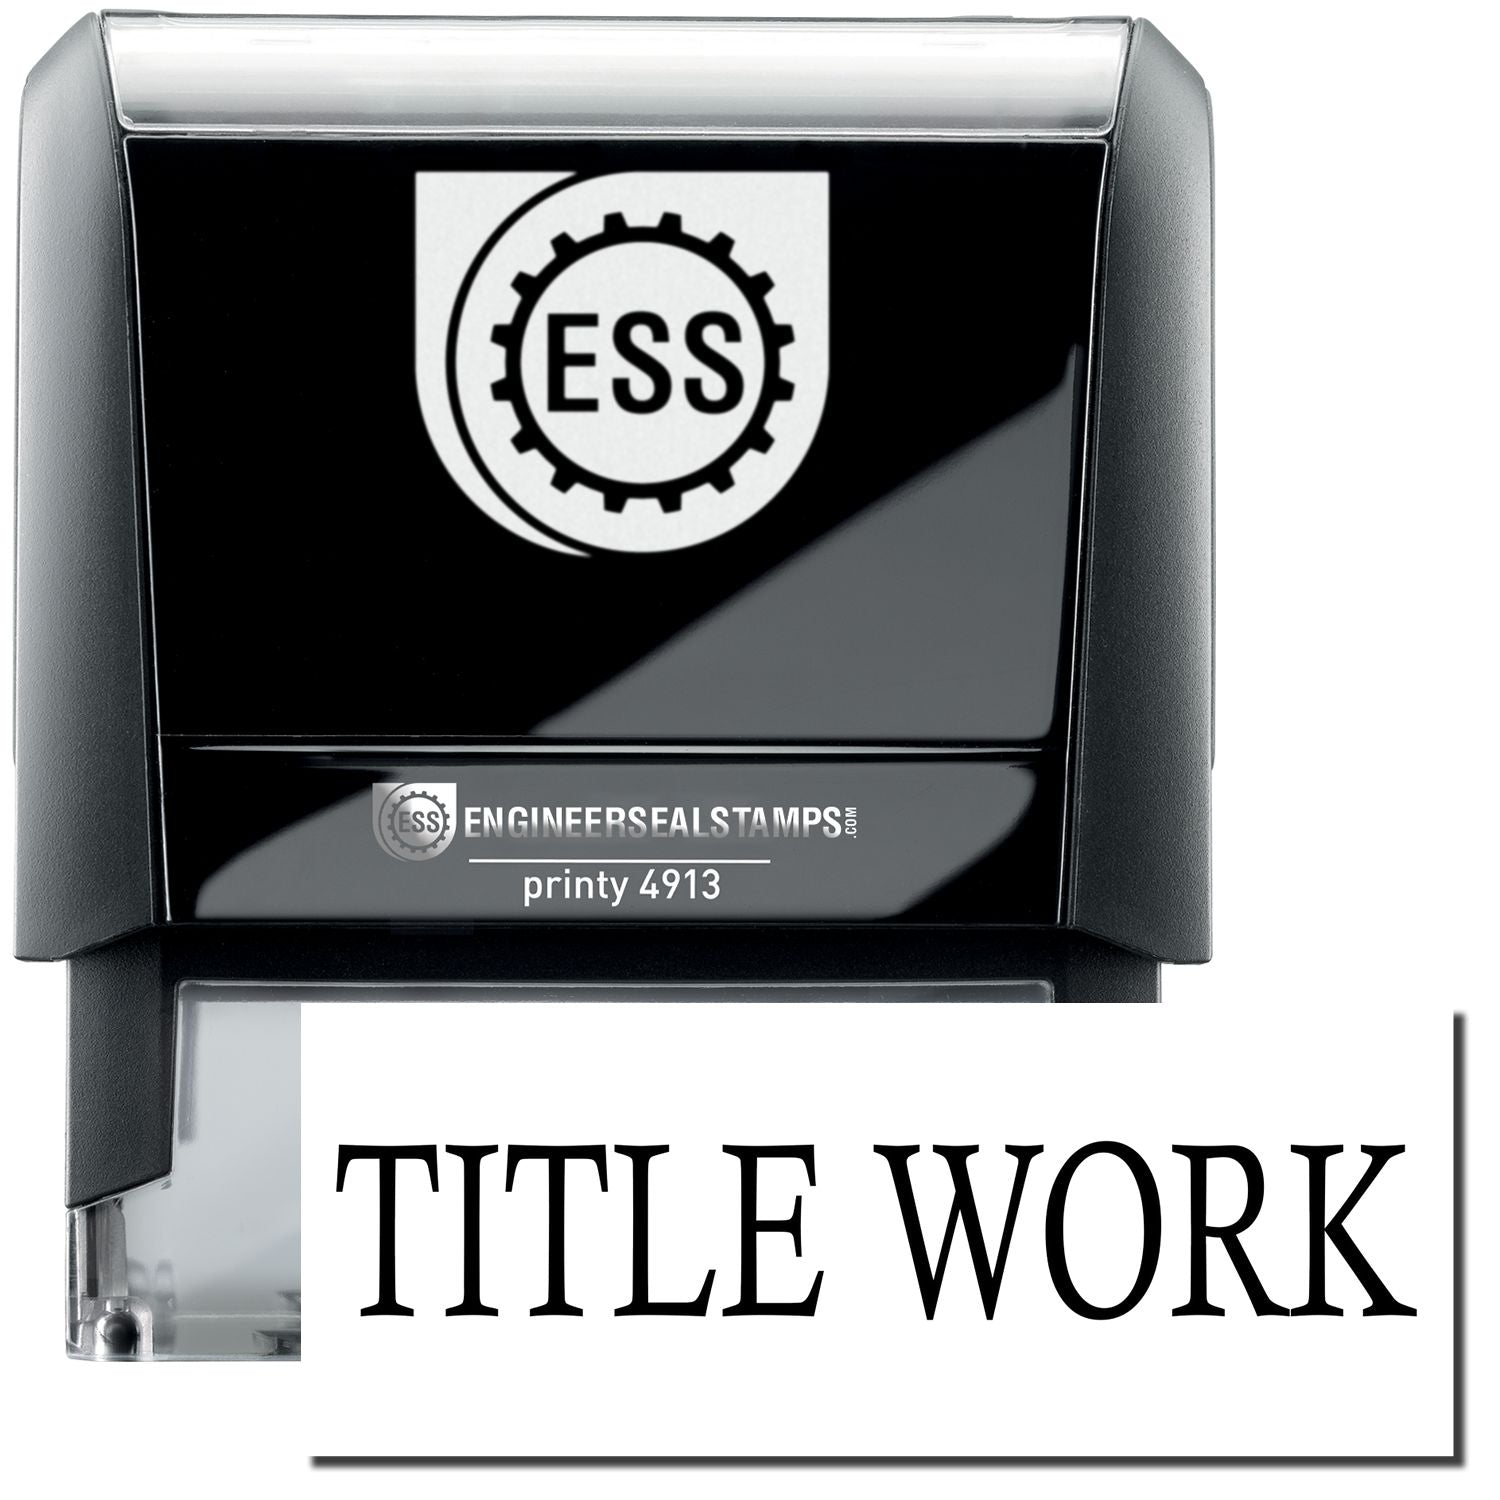 A self-inking stamp with a stamped image showing how the text "TITLE WORK" in a large bold font is displayed by it.